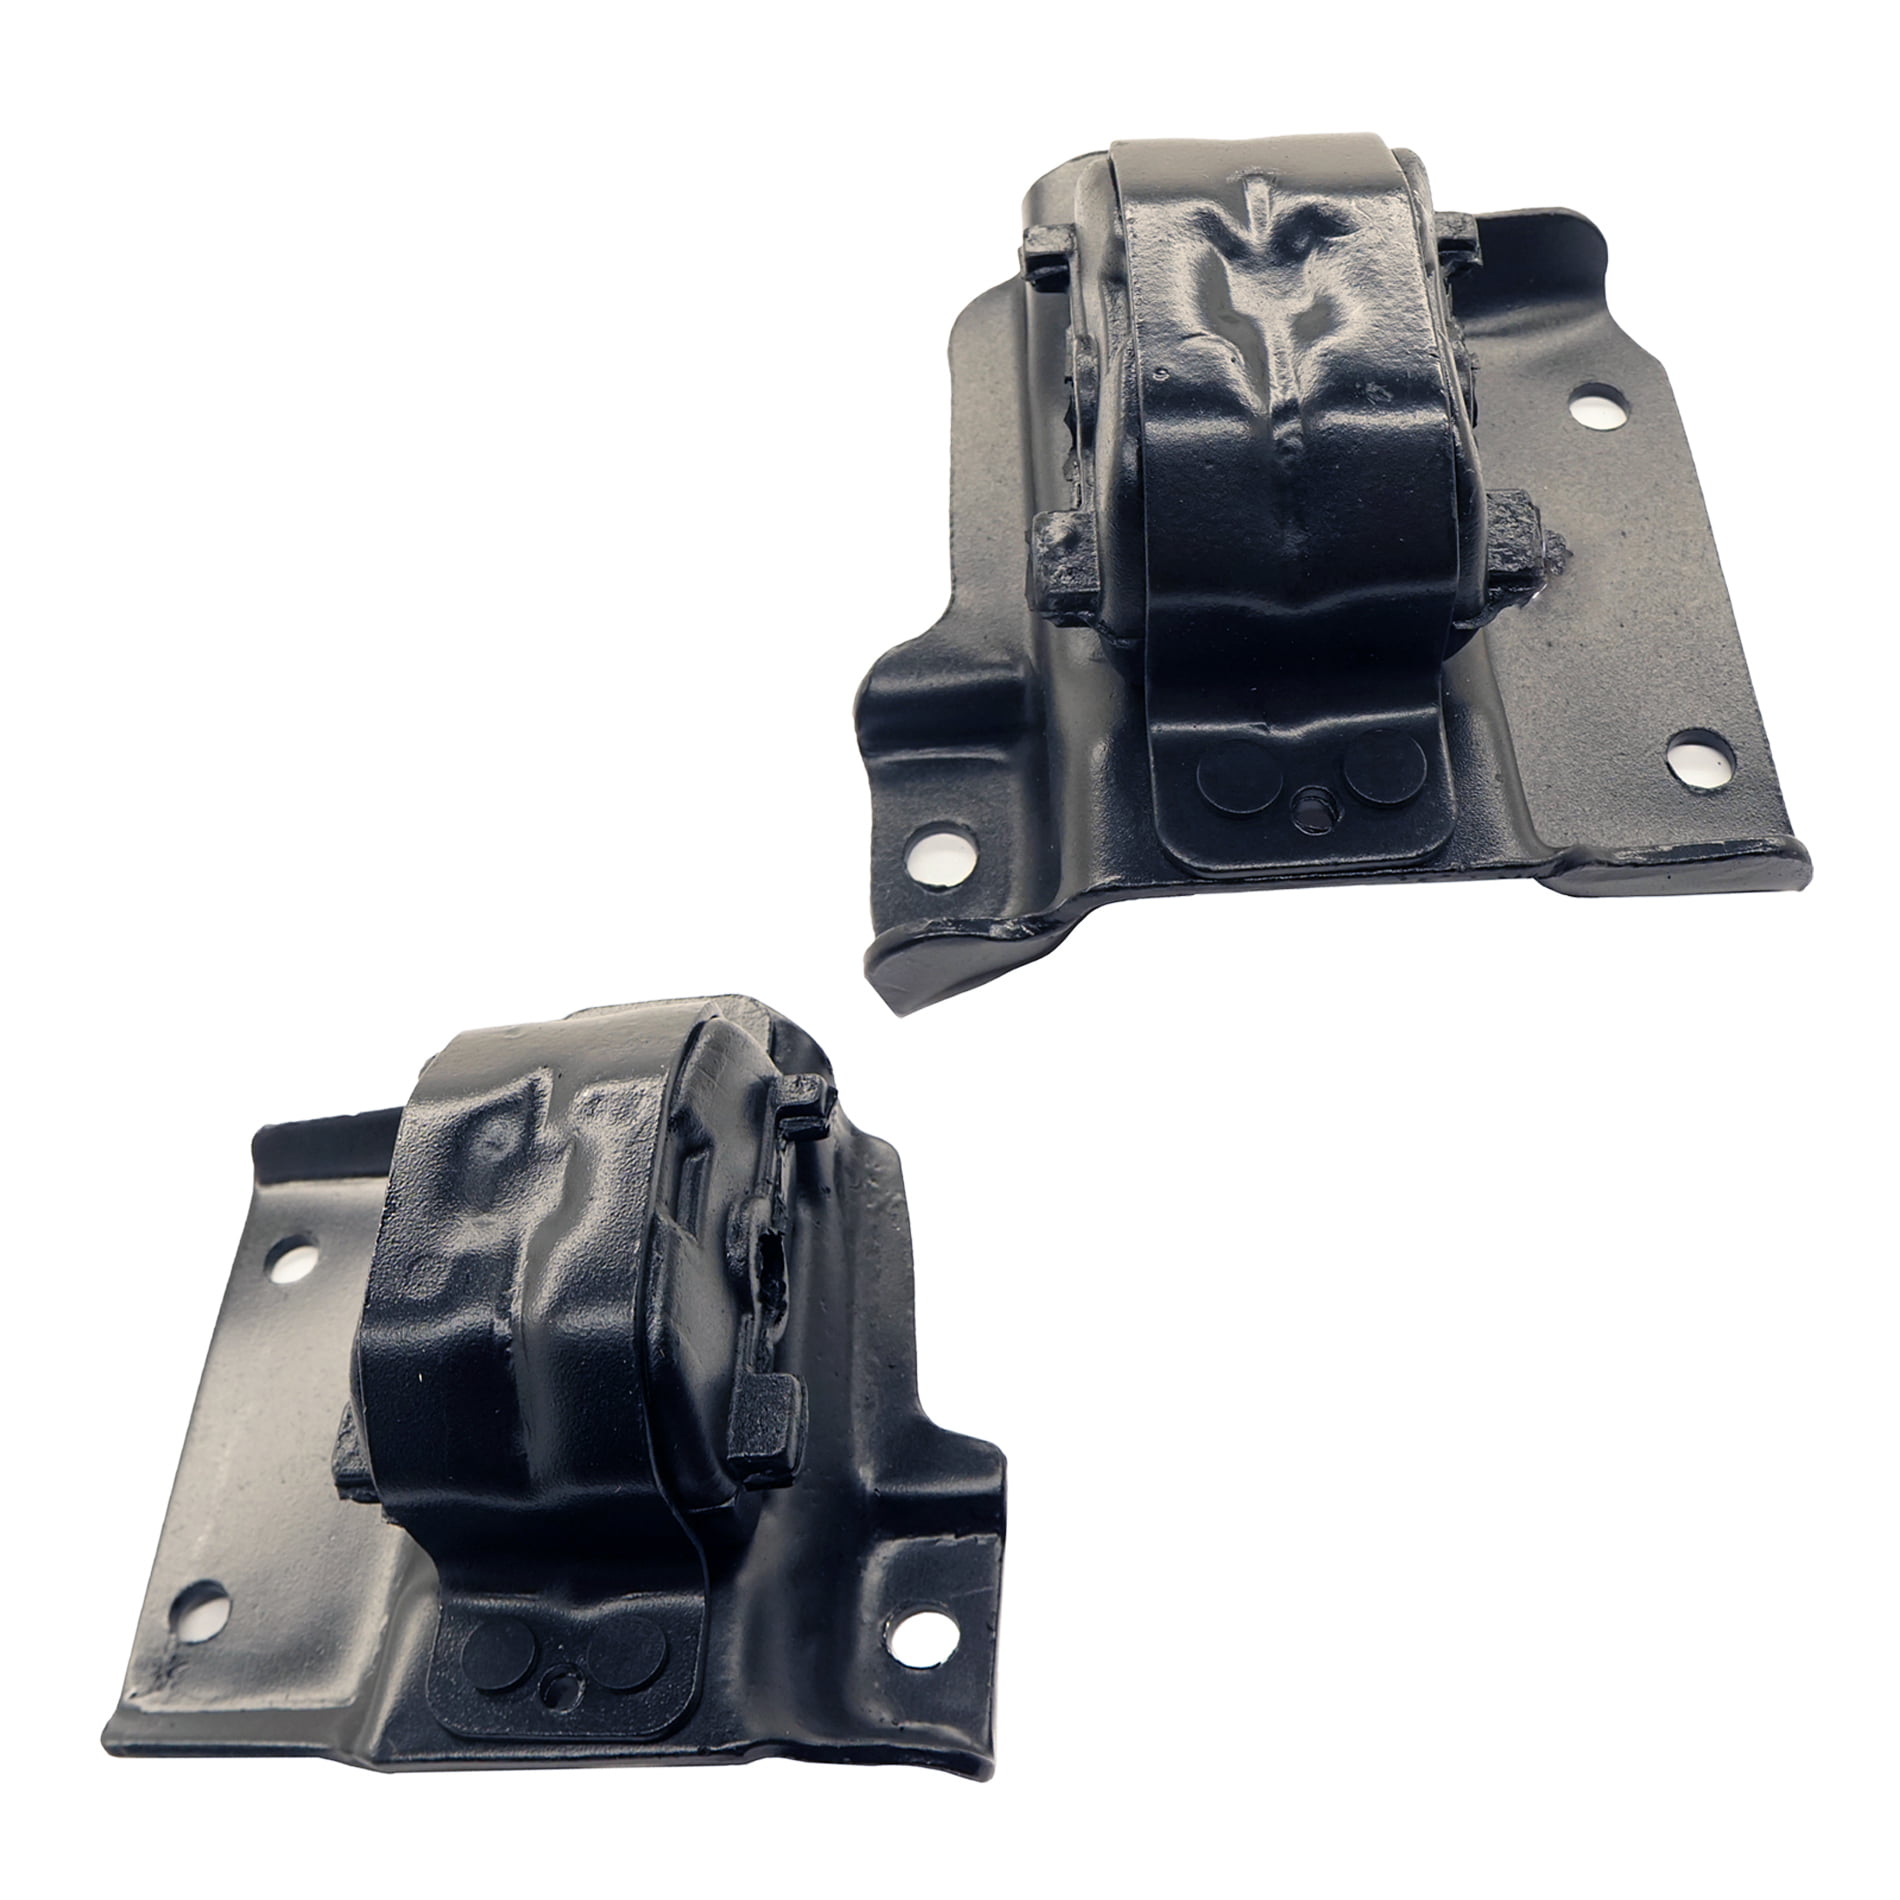 F150 Front Left & Front Right Engine Motor Mounts 2PCs Set for Ford Expedition 